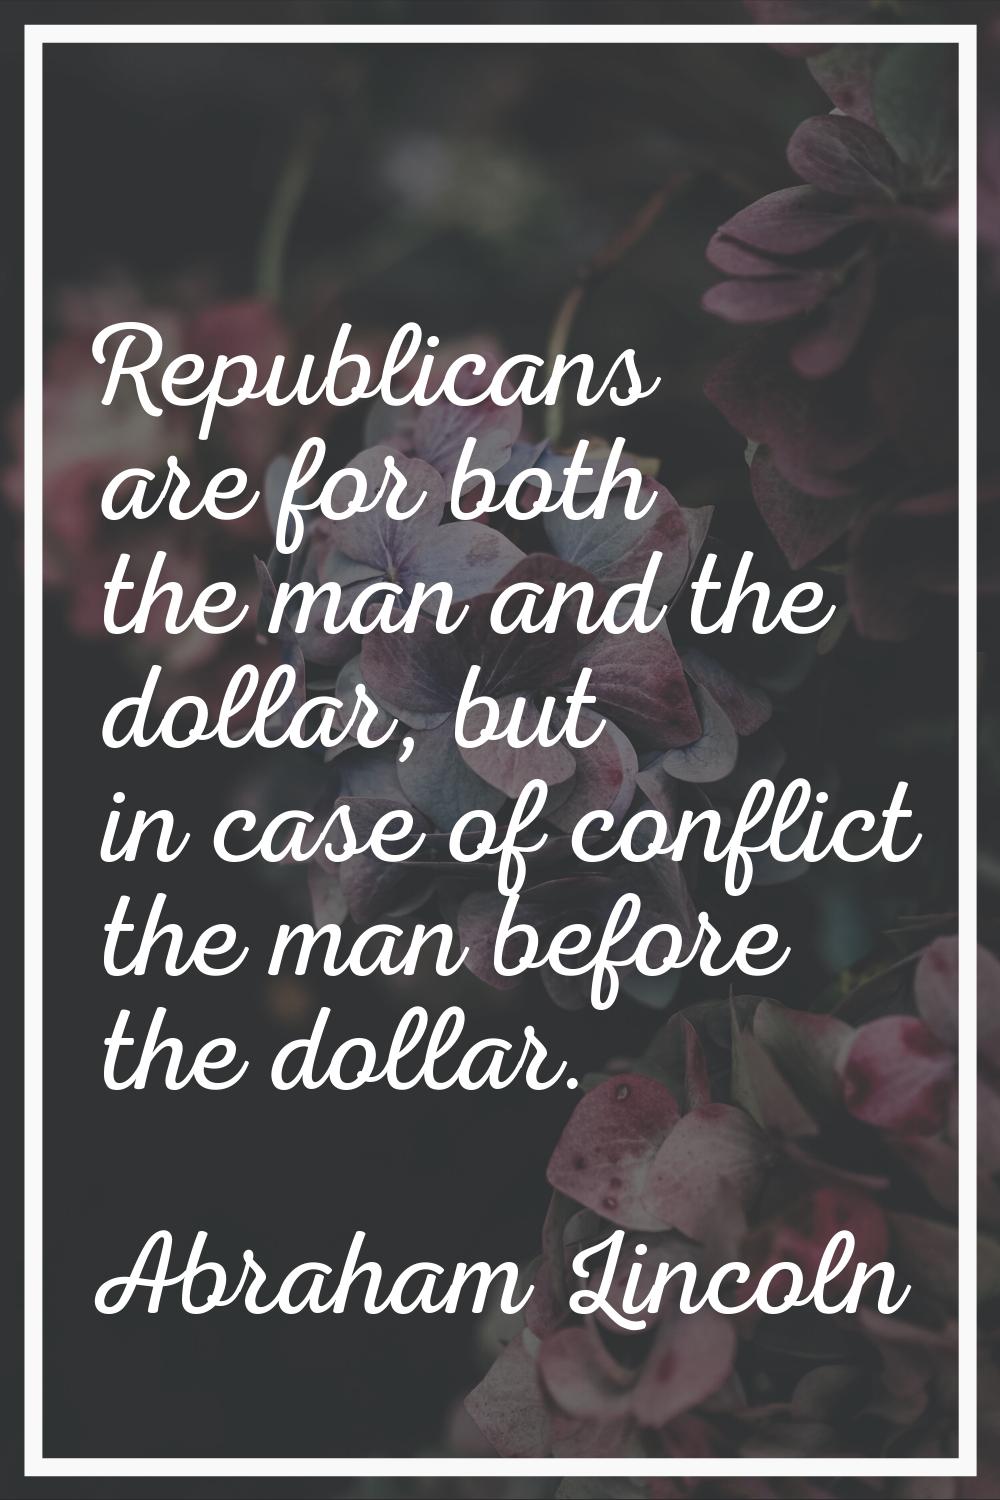 Republicans are for both the man and the dollar, but in case of conflict the man before the dollar.